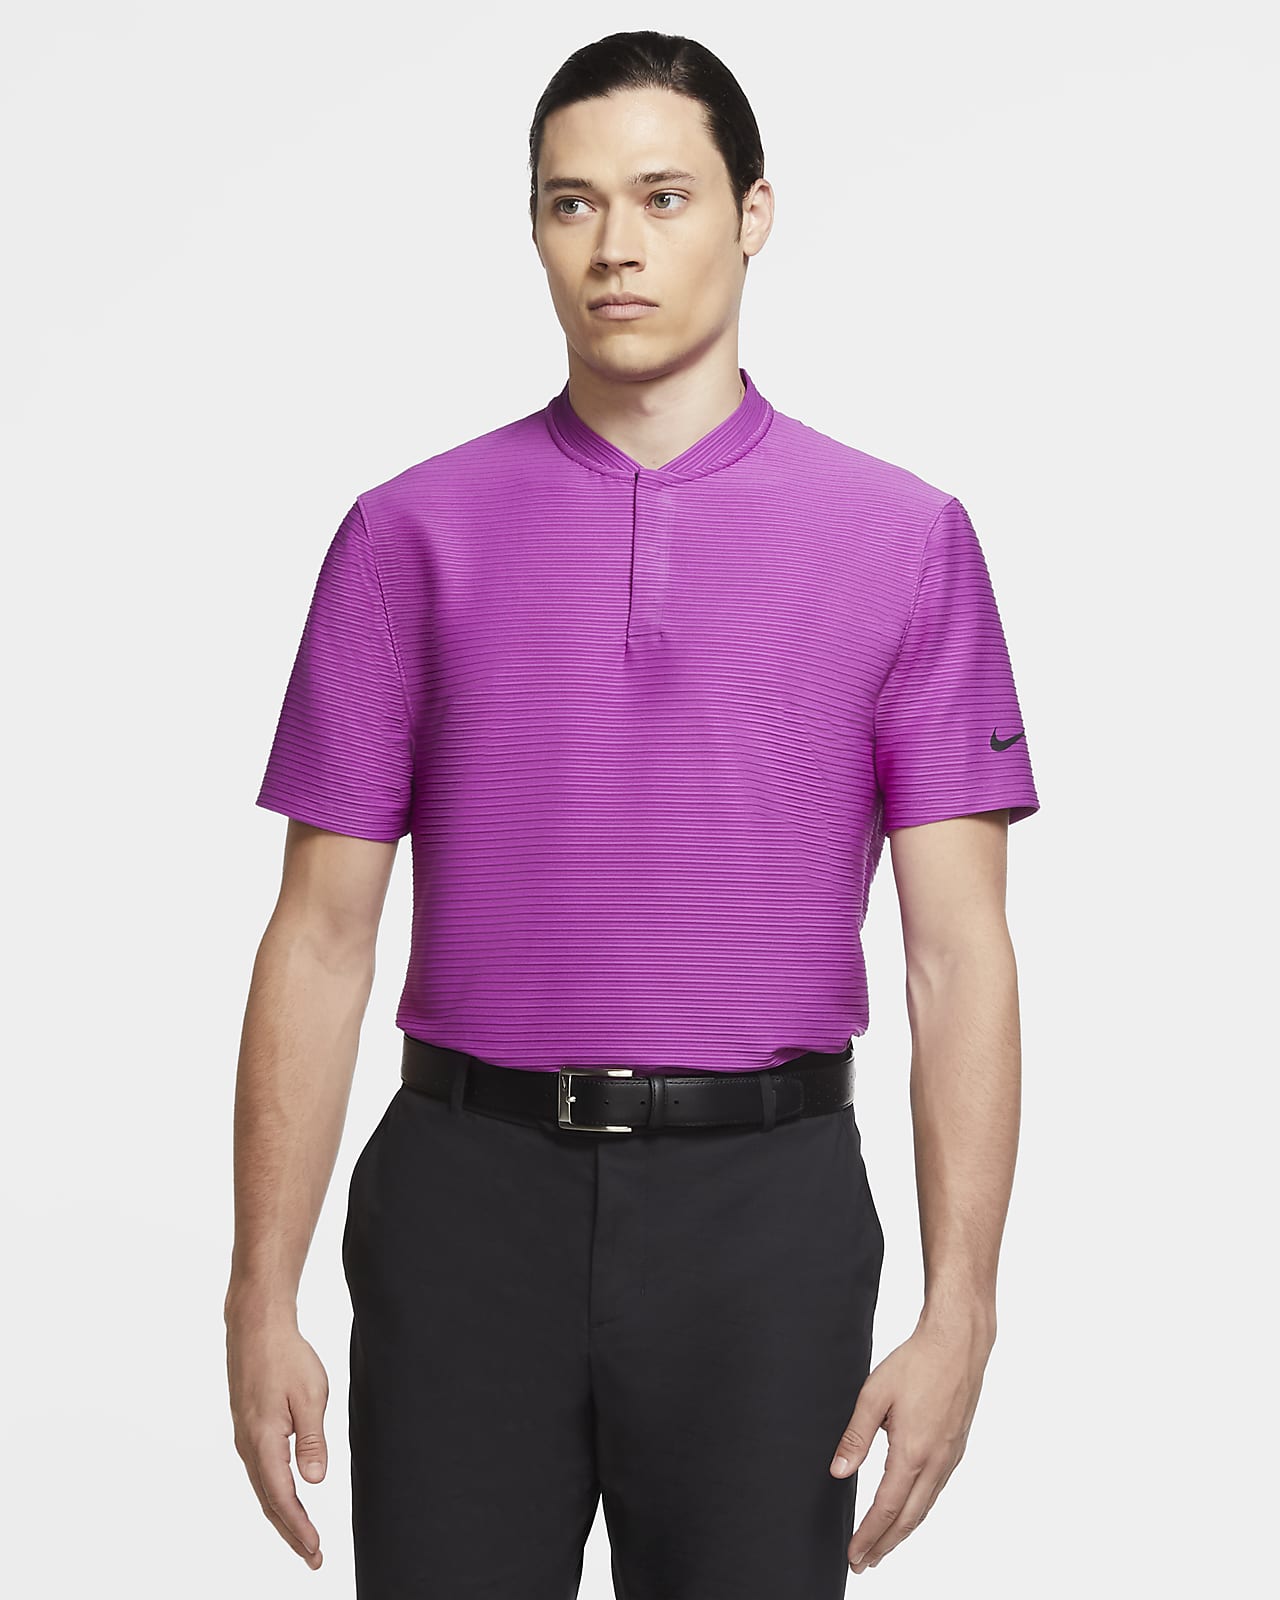 tiger woods golf clothing